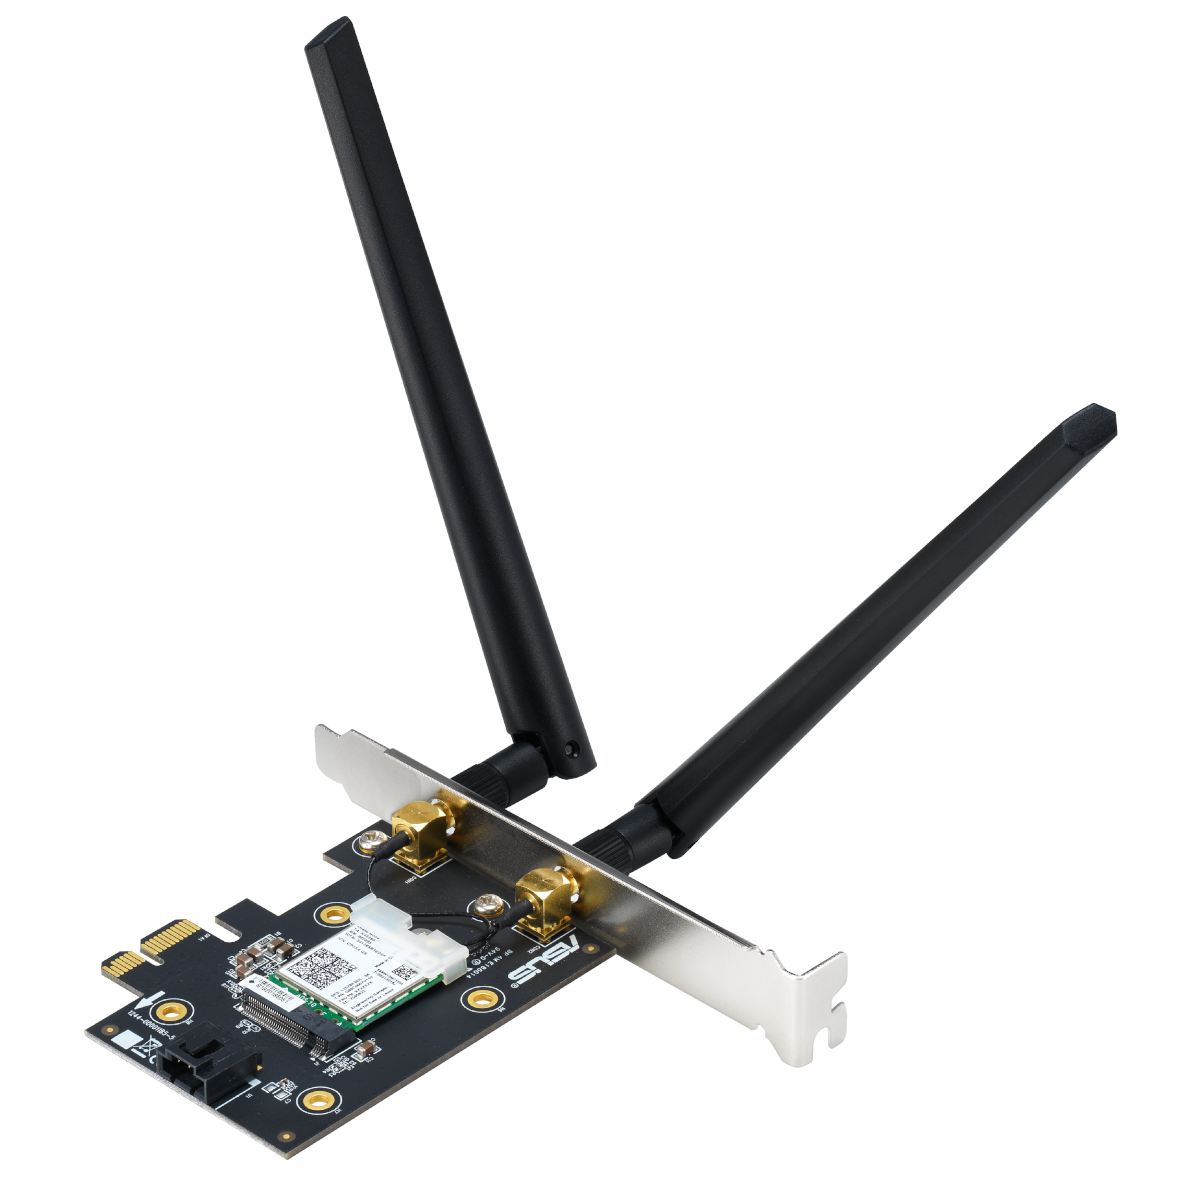 Asus - ASUS PCE-AX3000 Dual-Band Wireless AX3000 (WiFi 6) Bluetooth 5.0 PCI-E Adapter